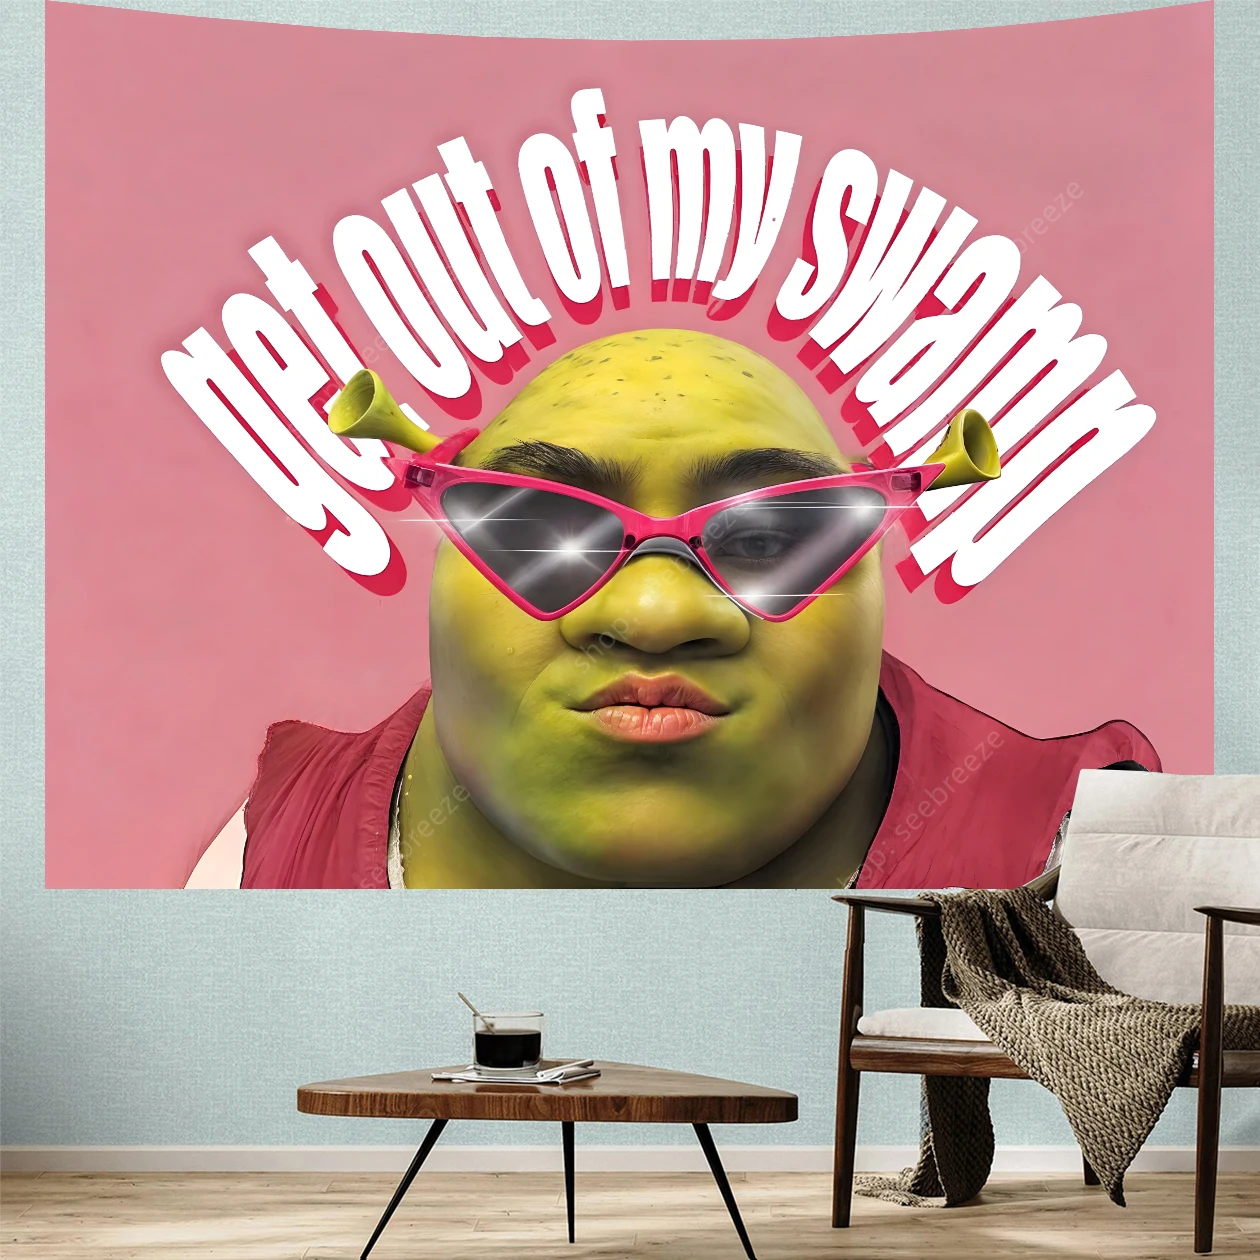 

Get Out of My Swamp Tapestry Shrek Pink Tapestries Funny Meme Tapestries Wall Hanging Art Poster for Bedroom Living Room Decor